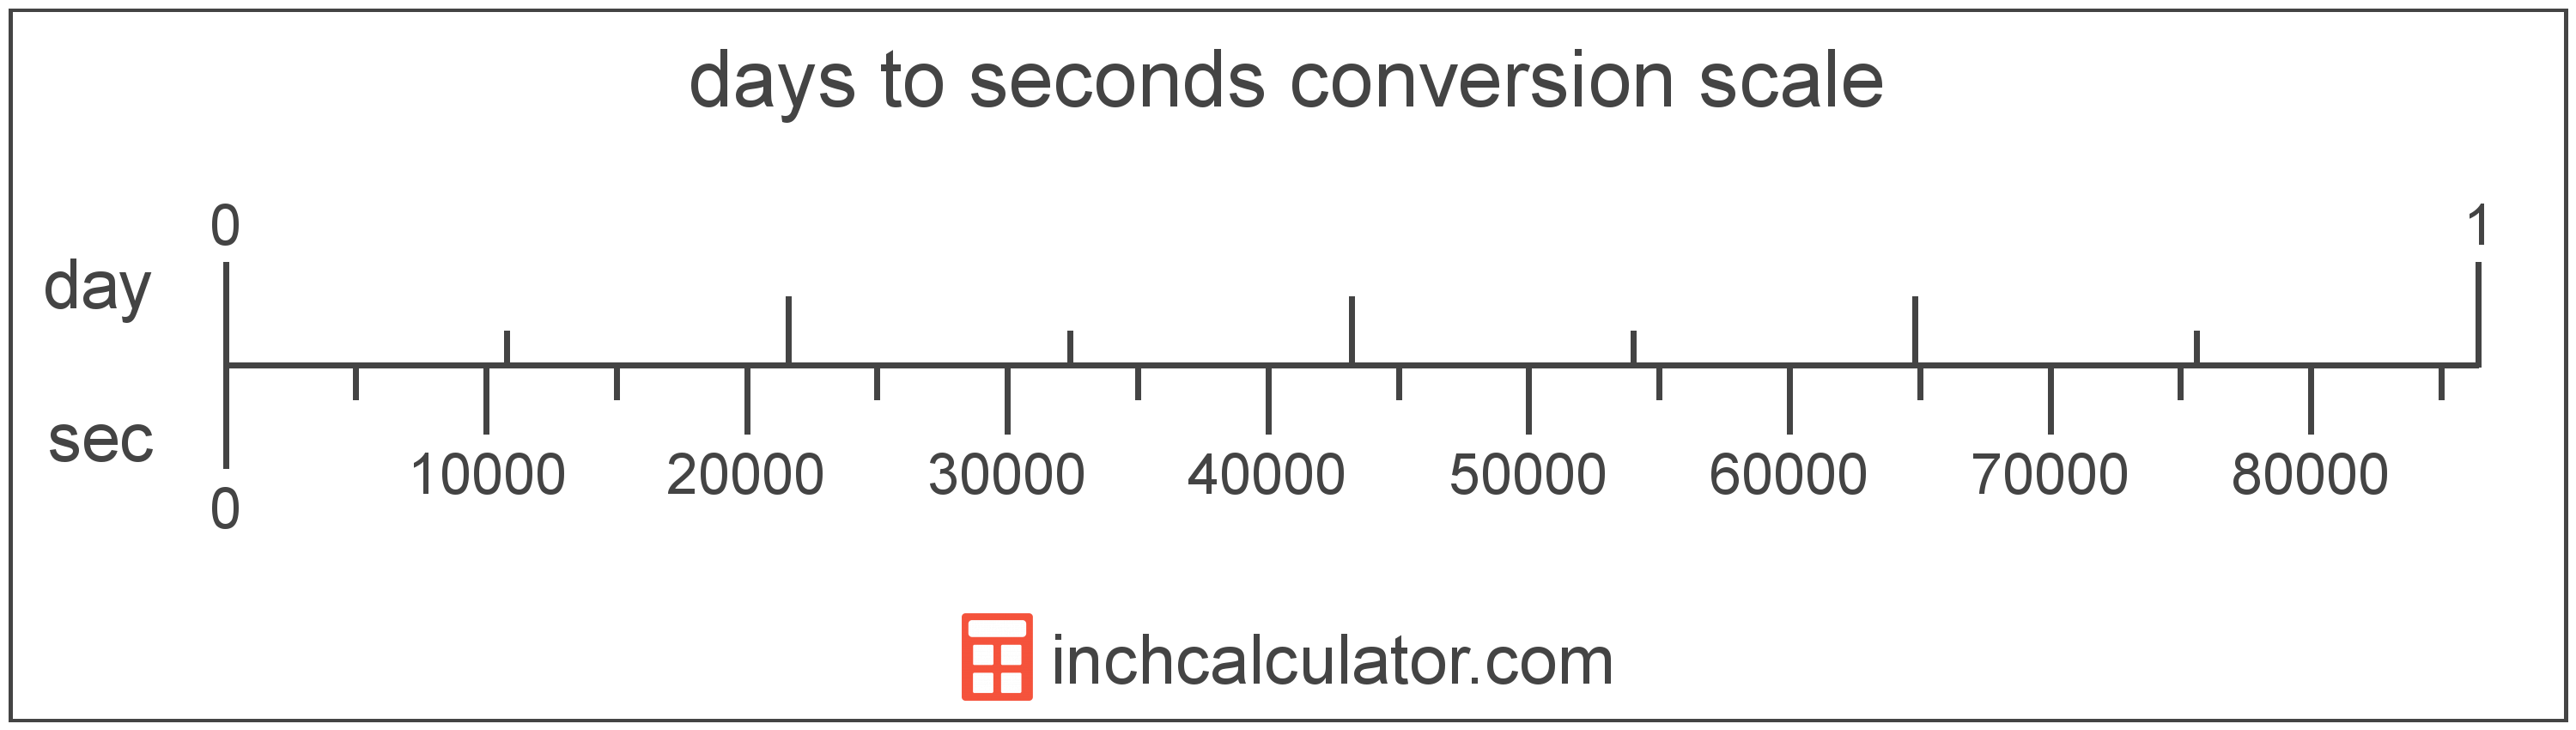 conversion scale showing seconds and equivalent days time values